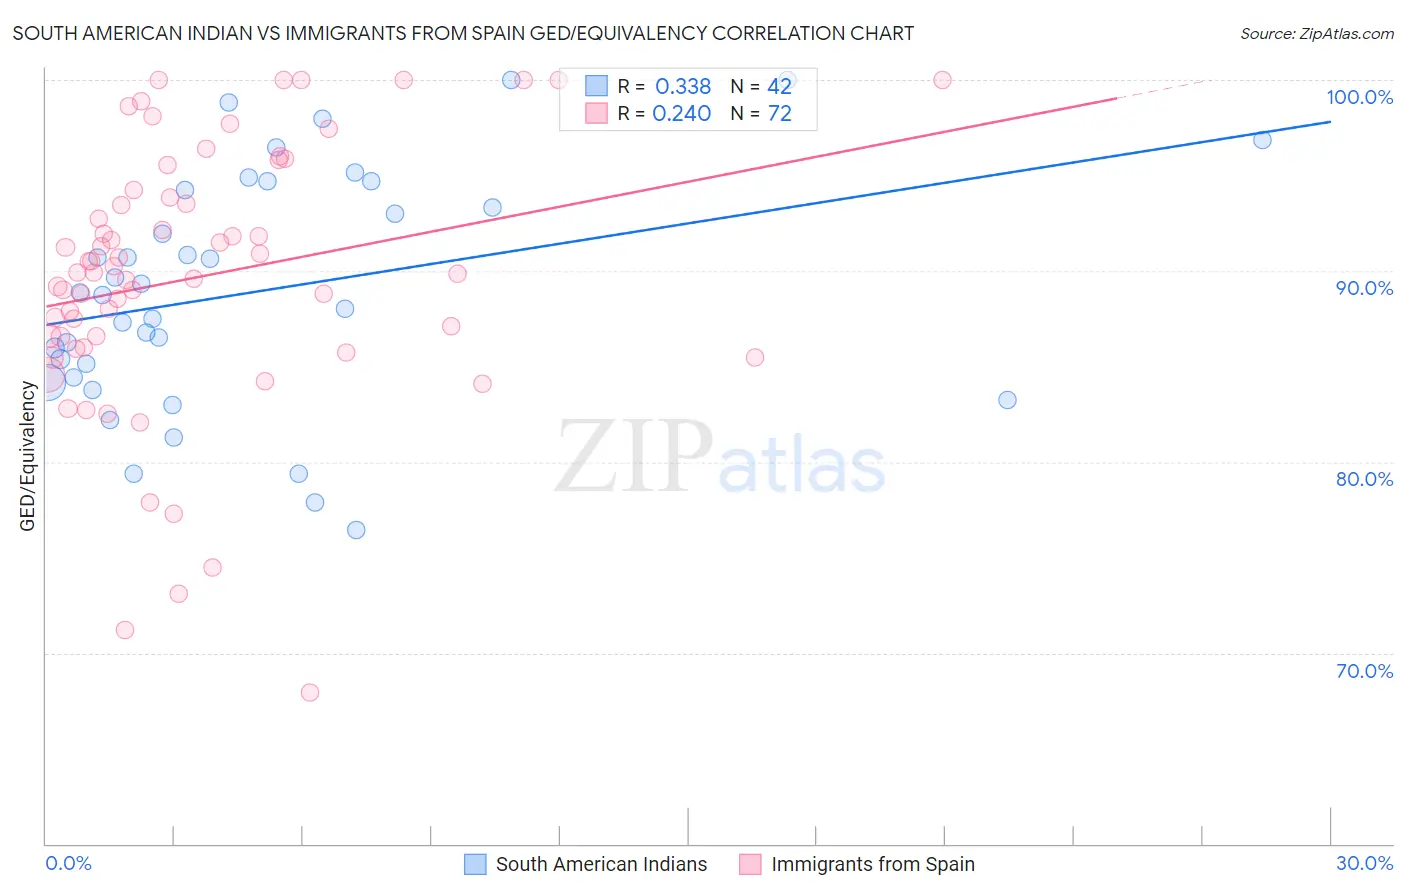 South American Indian vs Immigrants from Spain GED/Equivalency